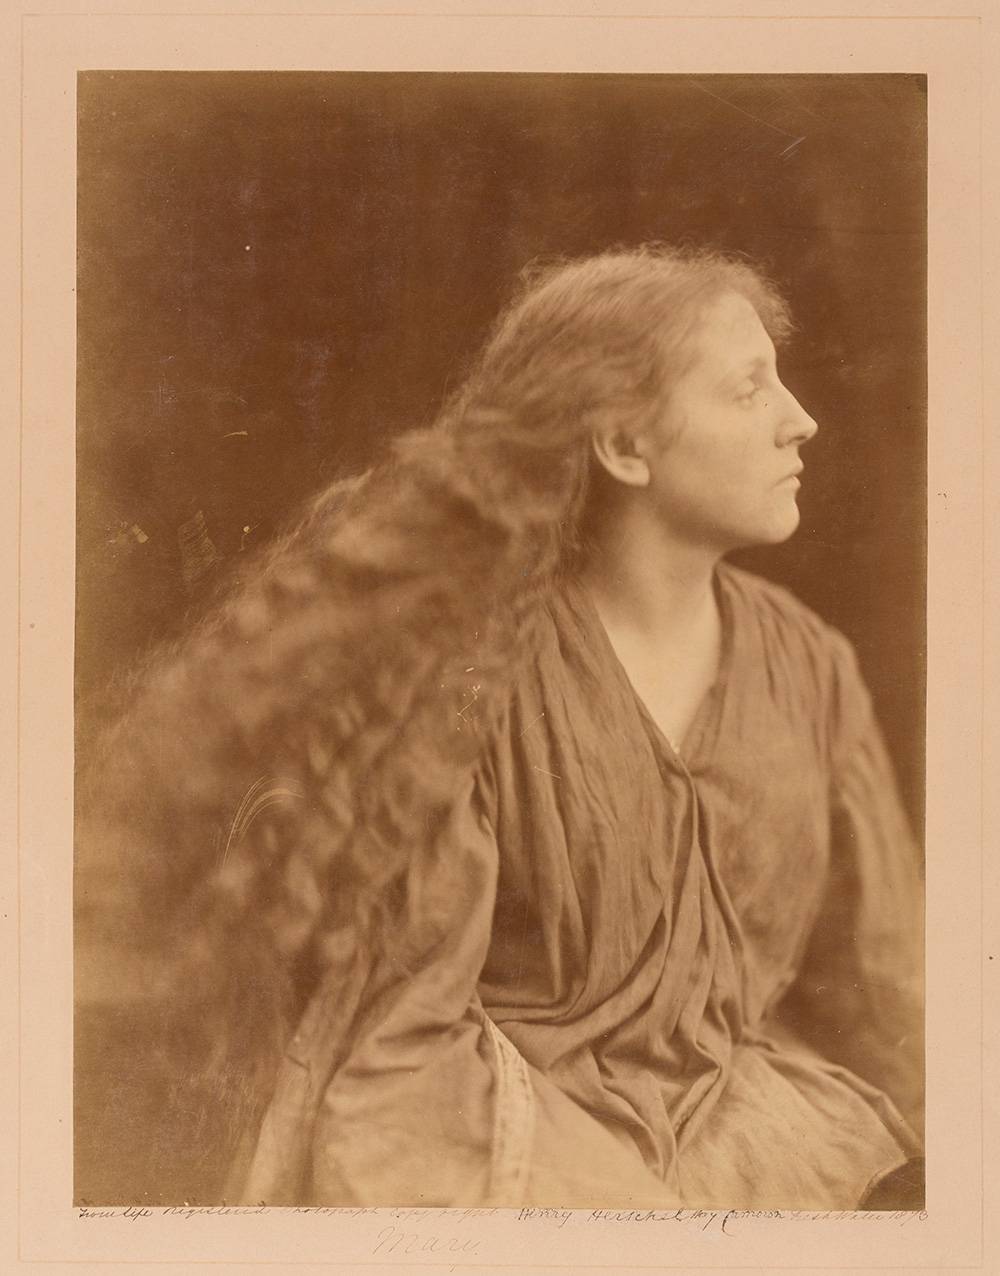 Julia Margaret Cameron, Mary Hillier, 1873 Tirage albuminé, © The Royal Photographic Society Collection at the V&A, acquired with the generous assistance of the National Lottery Heritage Fund and Art Fund.